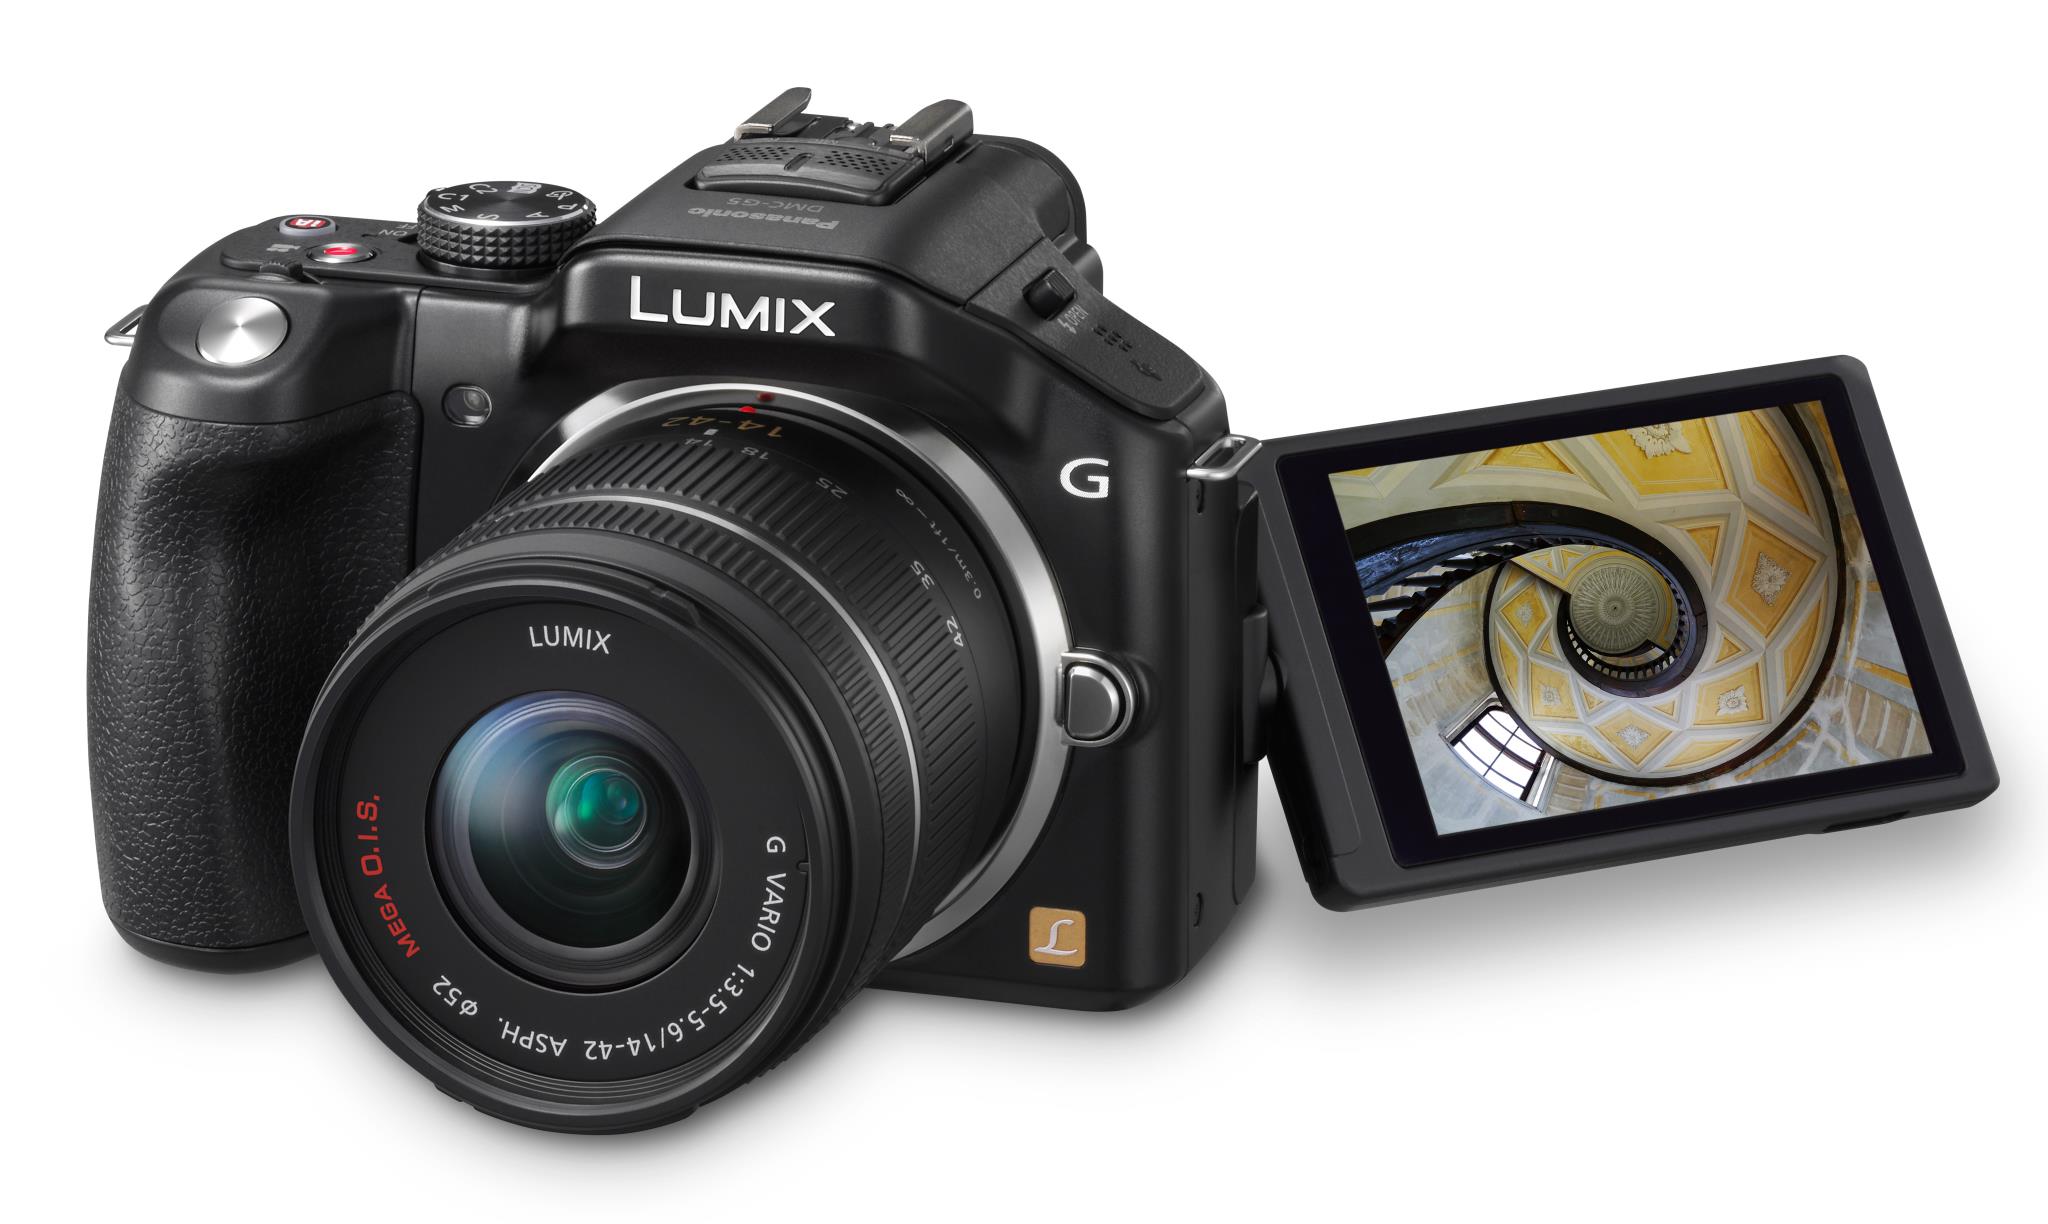 HUGE LOSS. The Lumix G5 camera is one of Panasonic's best selling products. Photo from Panasonic official Facebook page